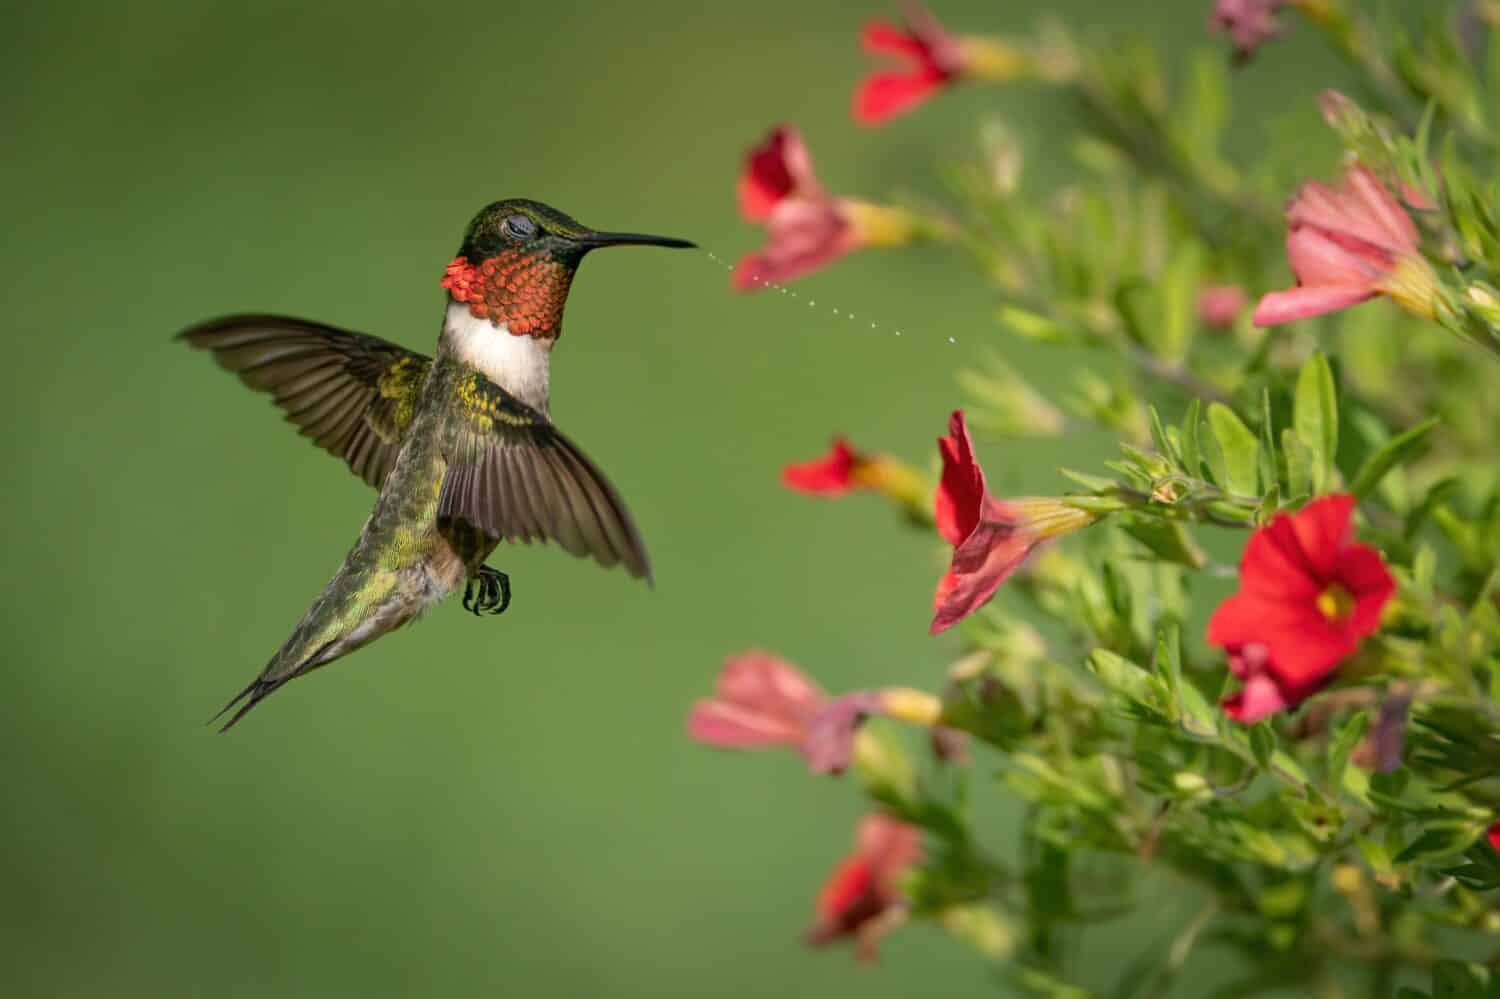 A Ruby-throated Hummingbird Shaking off the Water